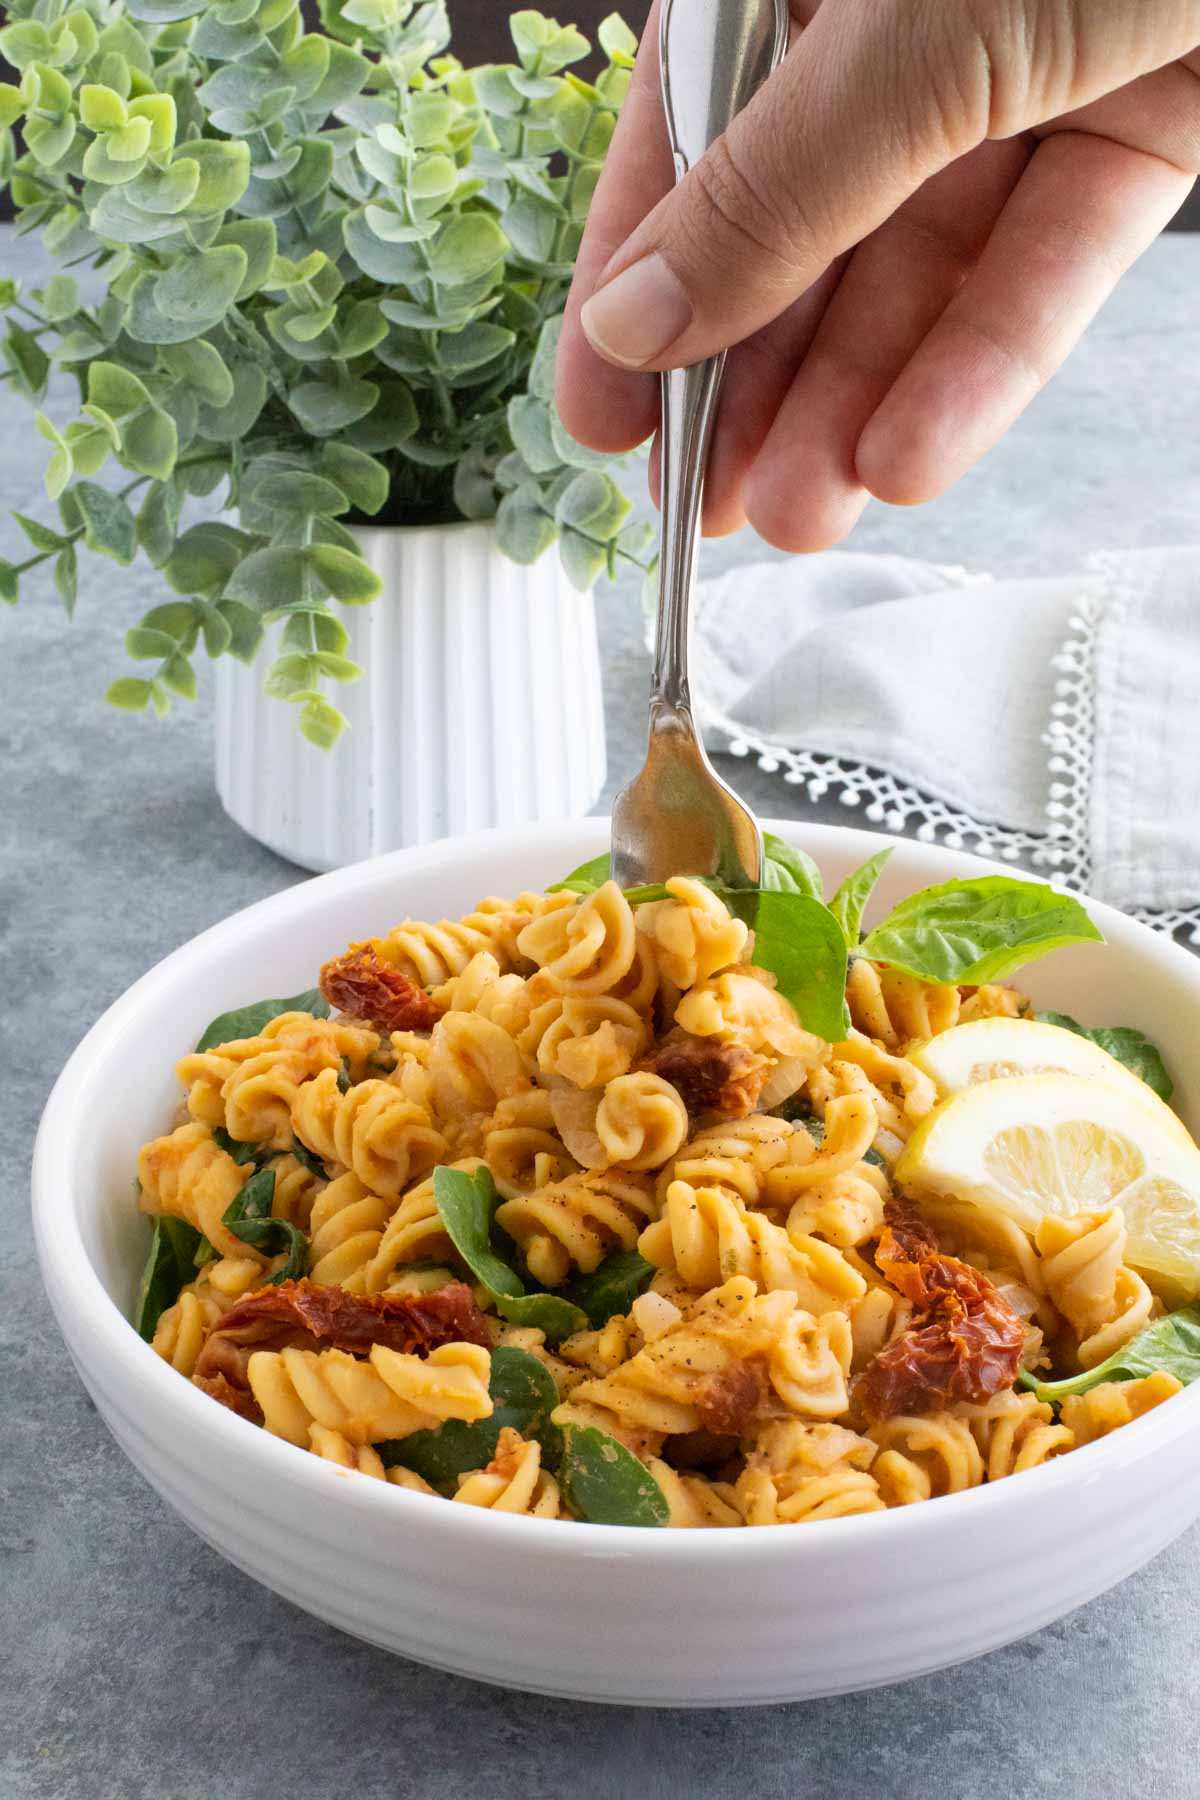 A hand pushing a fork into a white bowl filled with pasta in front of a small plant. 